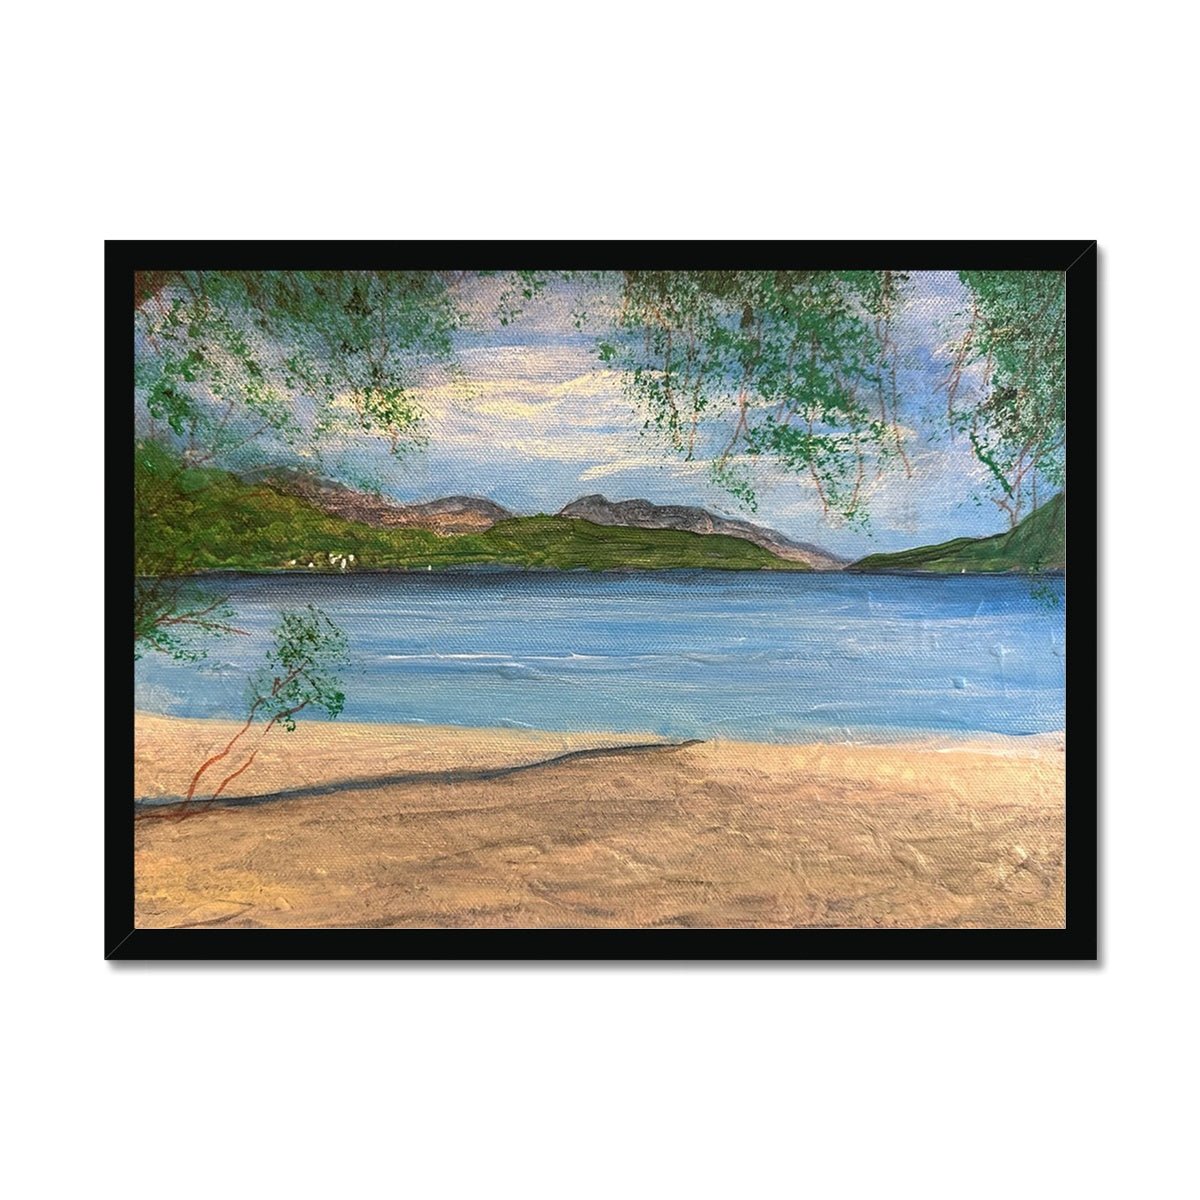 Firkin Point Loch Lomond Painting | Framed Prints From Scotland-Framed Prints-Scottish Lochs & Mountains Art Gallery-A2 Landscape-Black Frame-Paintings, Prints, Homeware, Art Gifts From Scotland By Scottish Artist Kevin Hunter